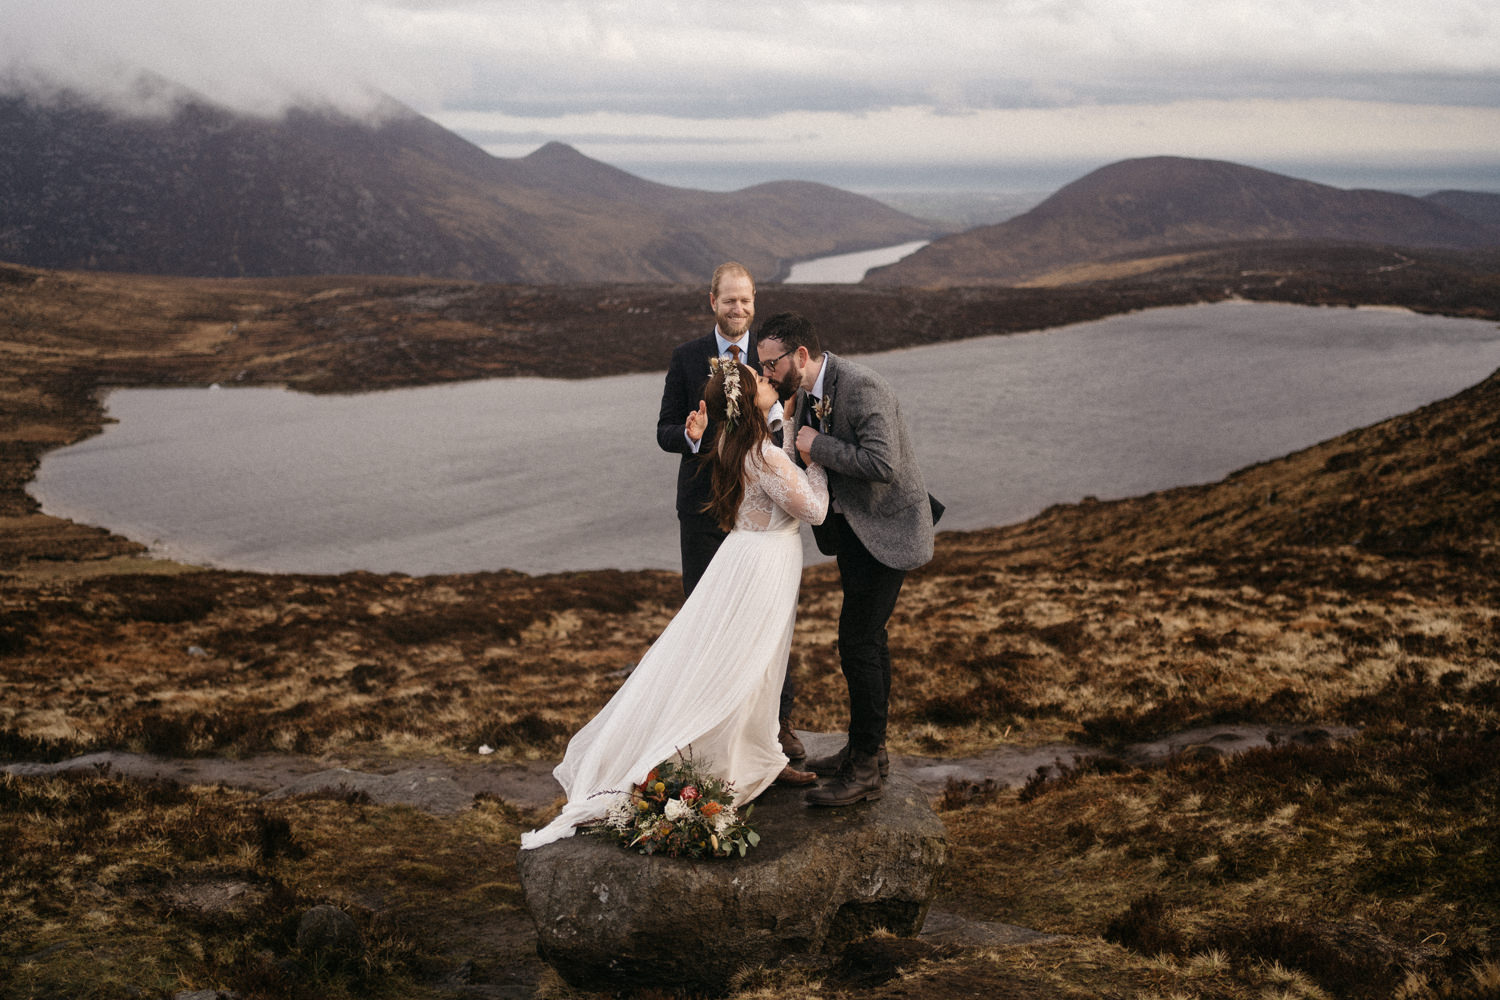 first ever legal wedding ceremony in the Mourne mountains Mourne Mountains Wedding Photography